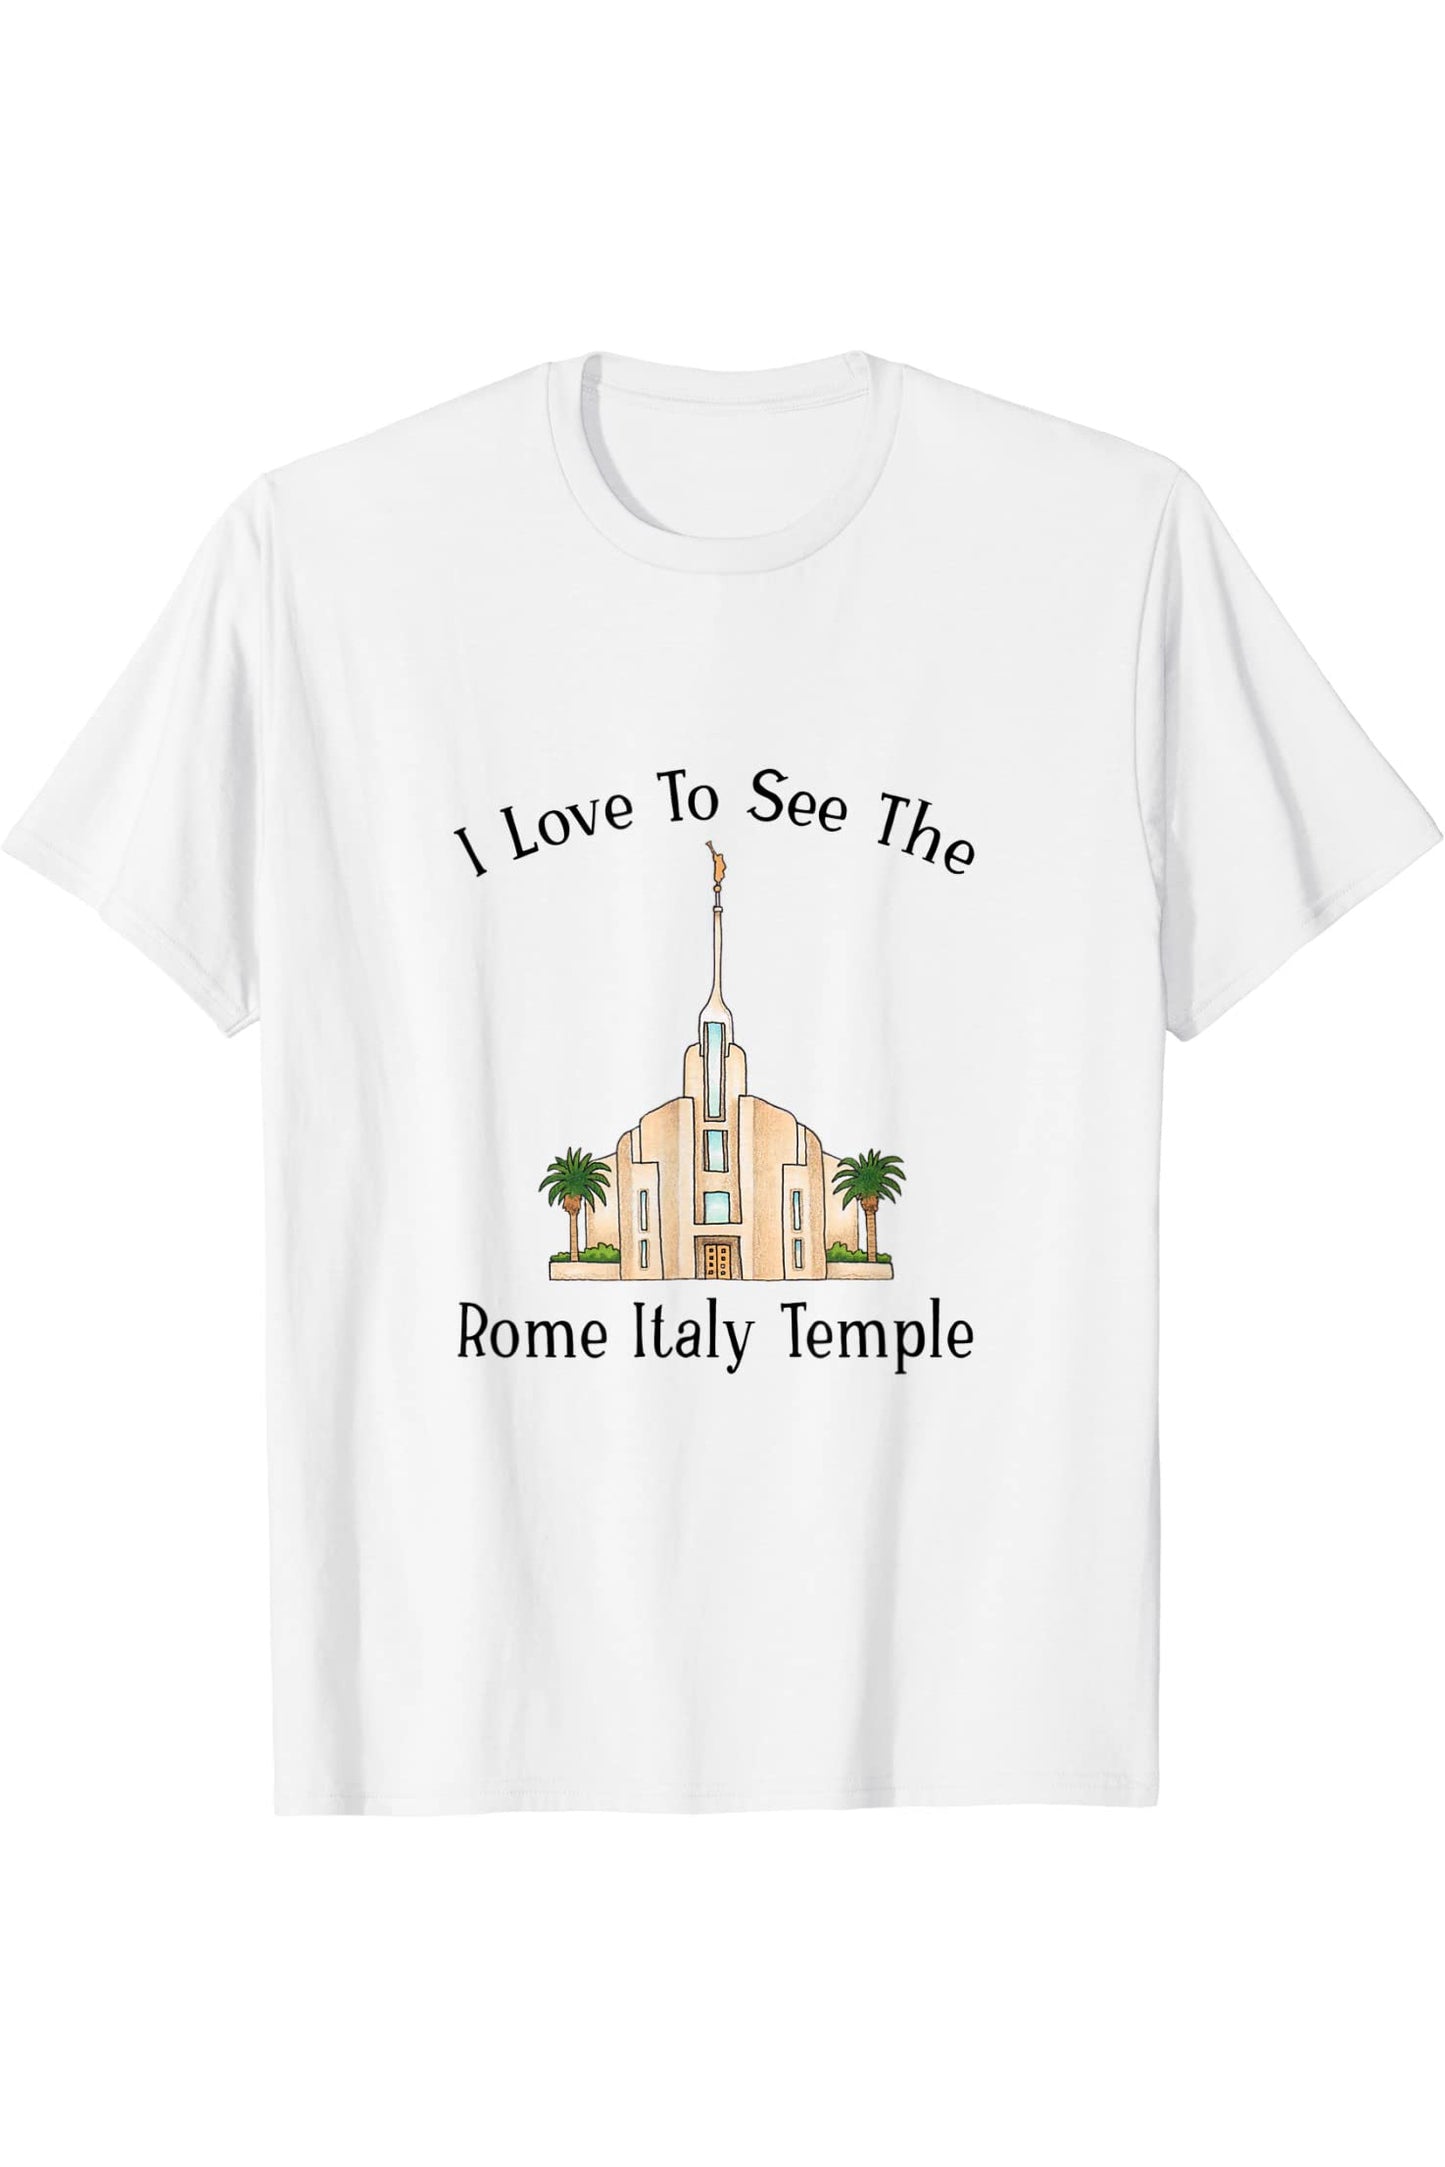 Rom Italy Temple, I love to see my Temple, Farbe T-Shirt